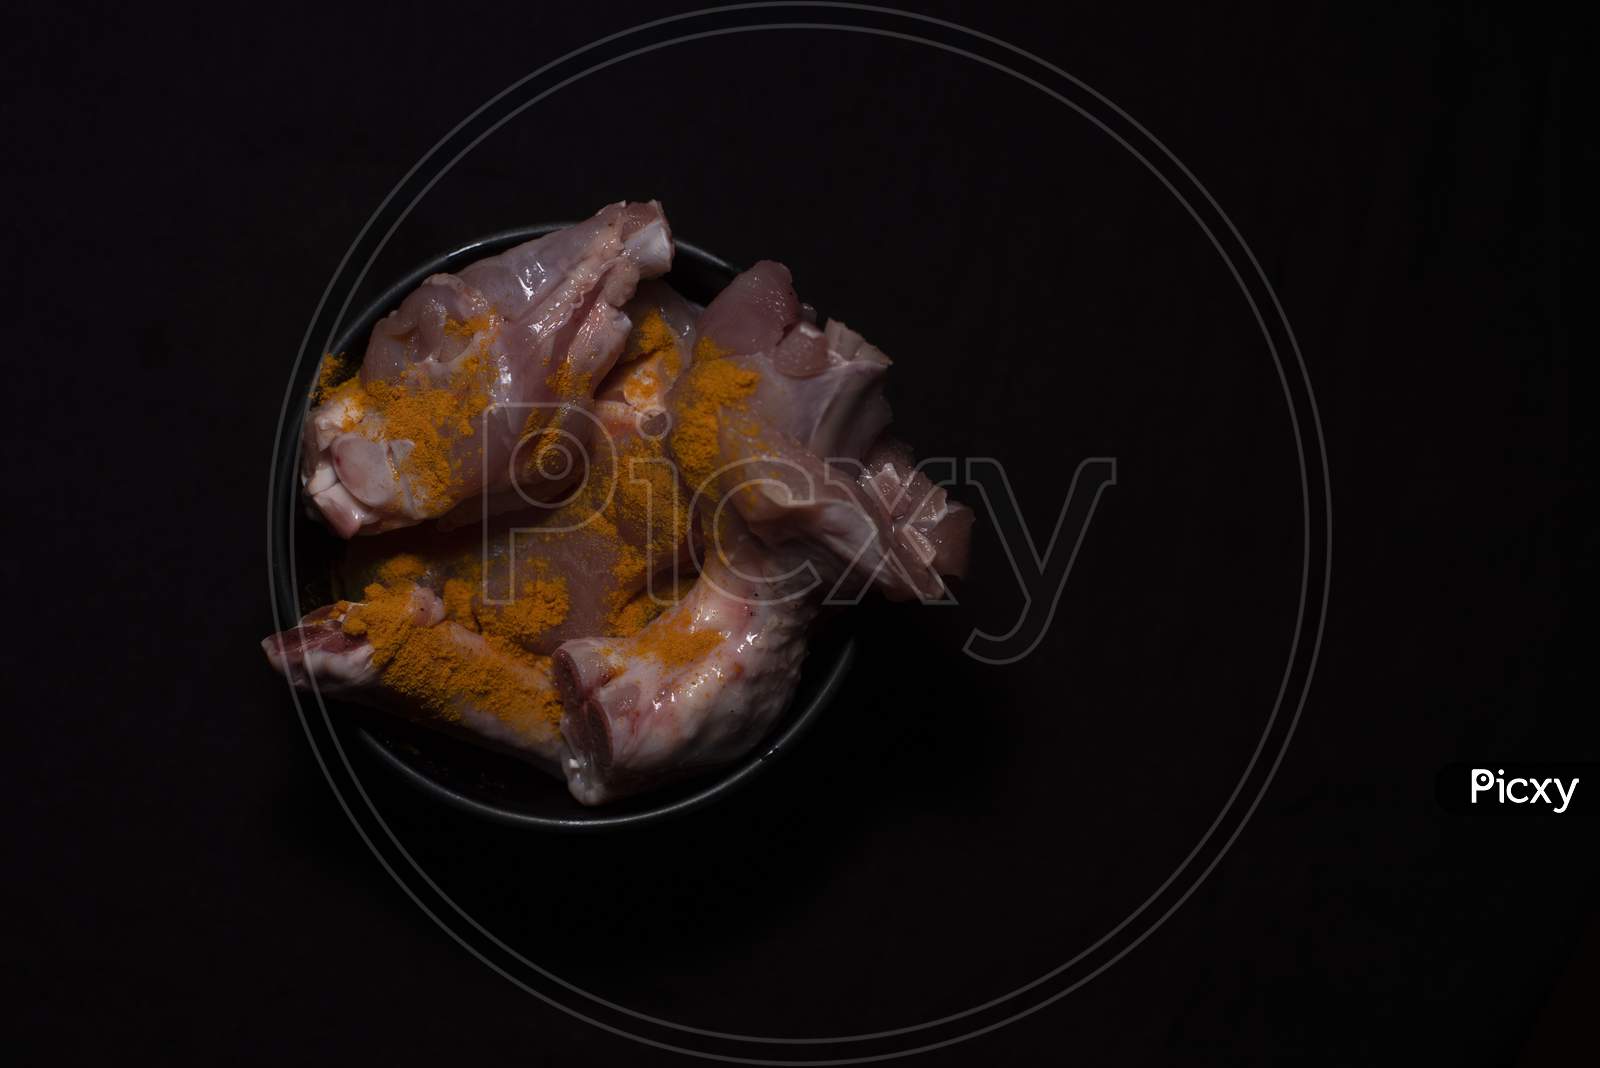 Top Down Image Of A Bowl Of Raw Chicken Pieces Sprinkled With Turmeric Powder In A Dark Copy Space Background. Food And Product Photography.